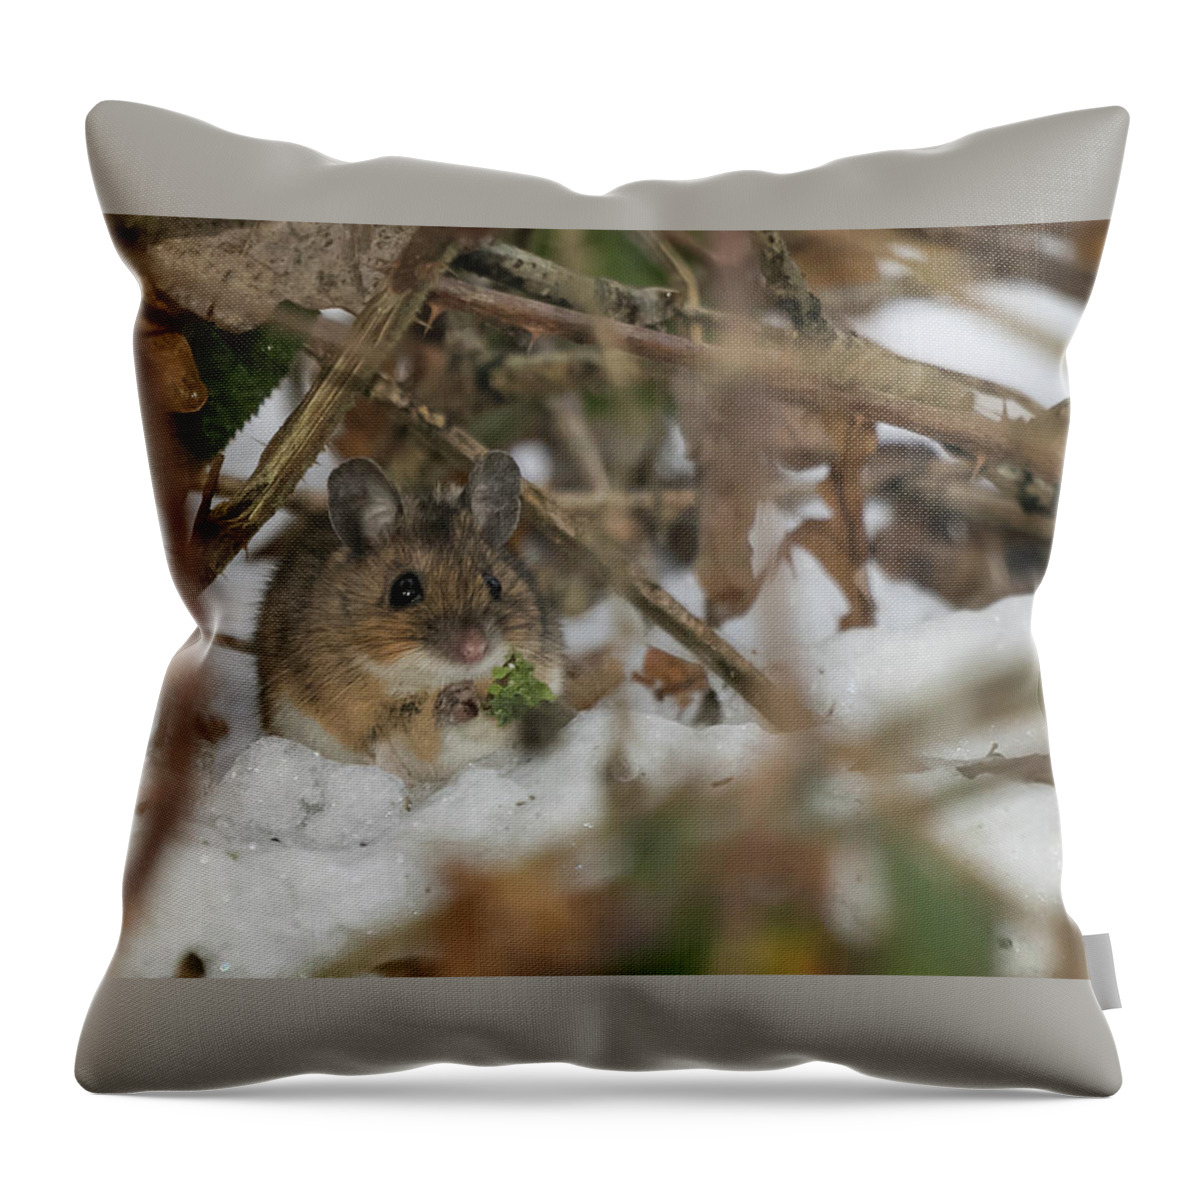 ©wendycooper Throw Pillow featuring the photograph Wood Mouse by Wendy Cooper